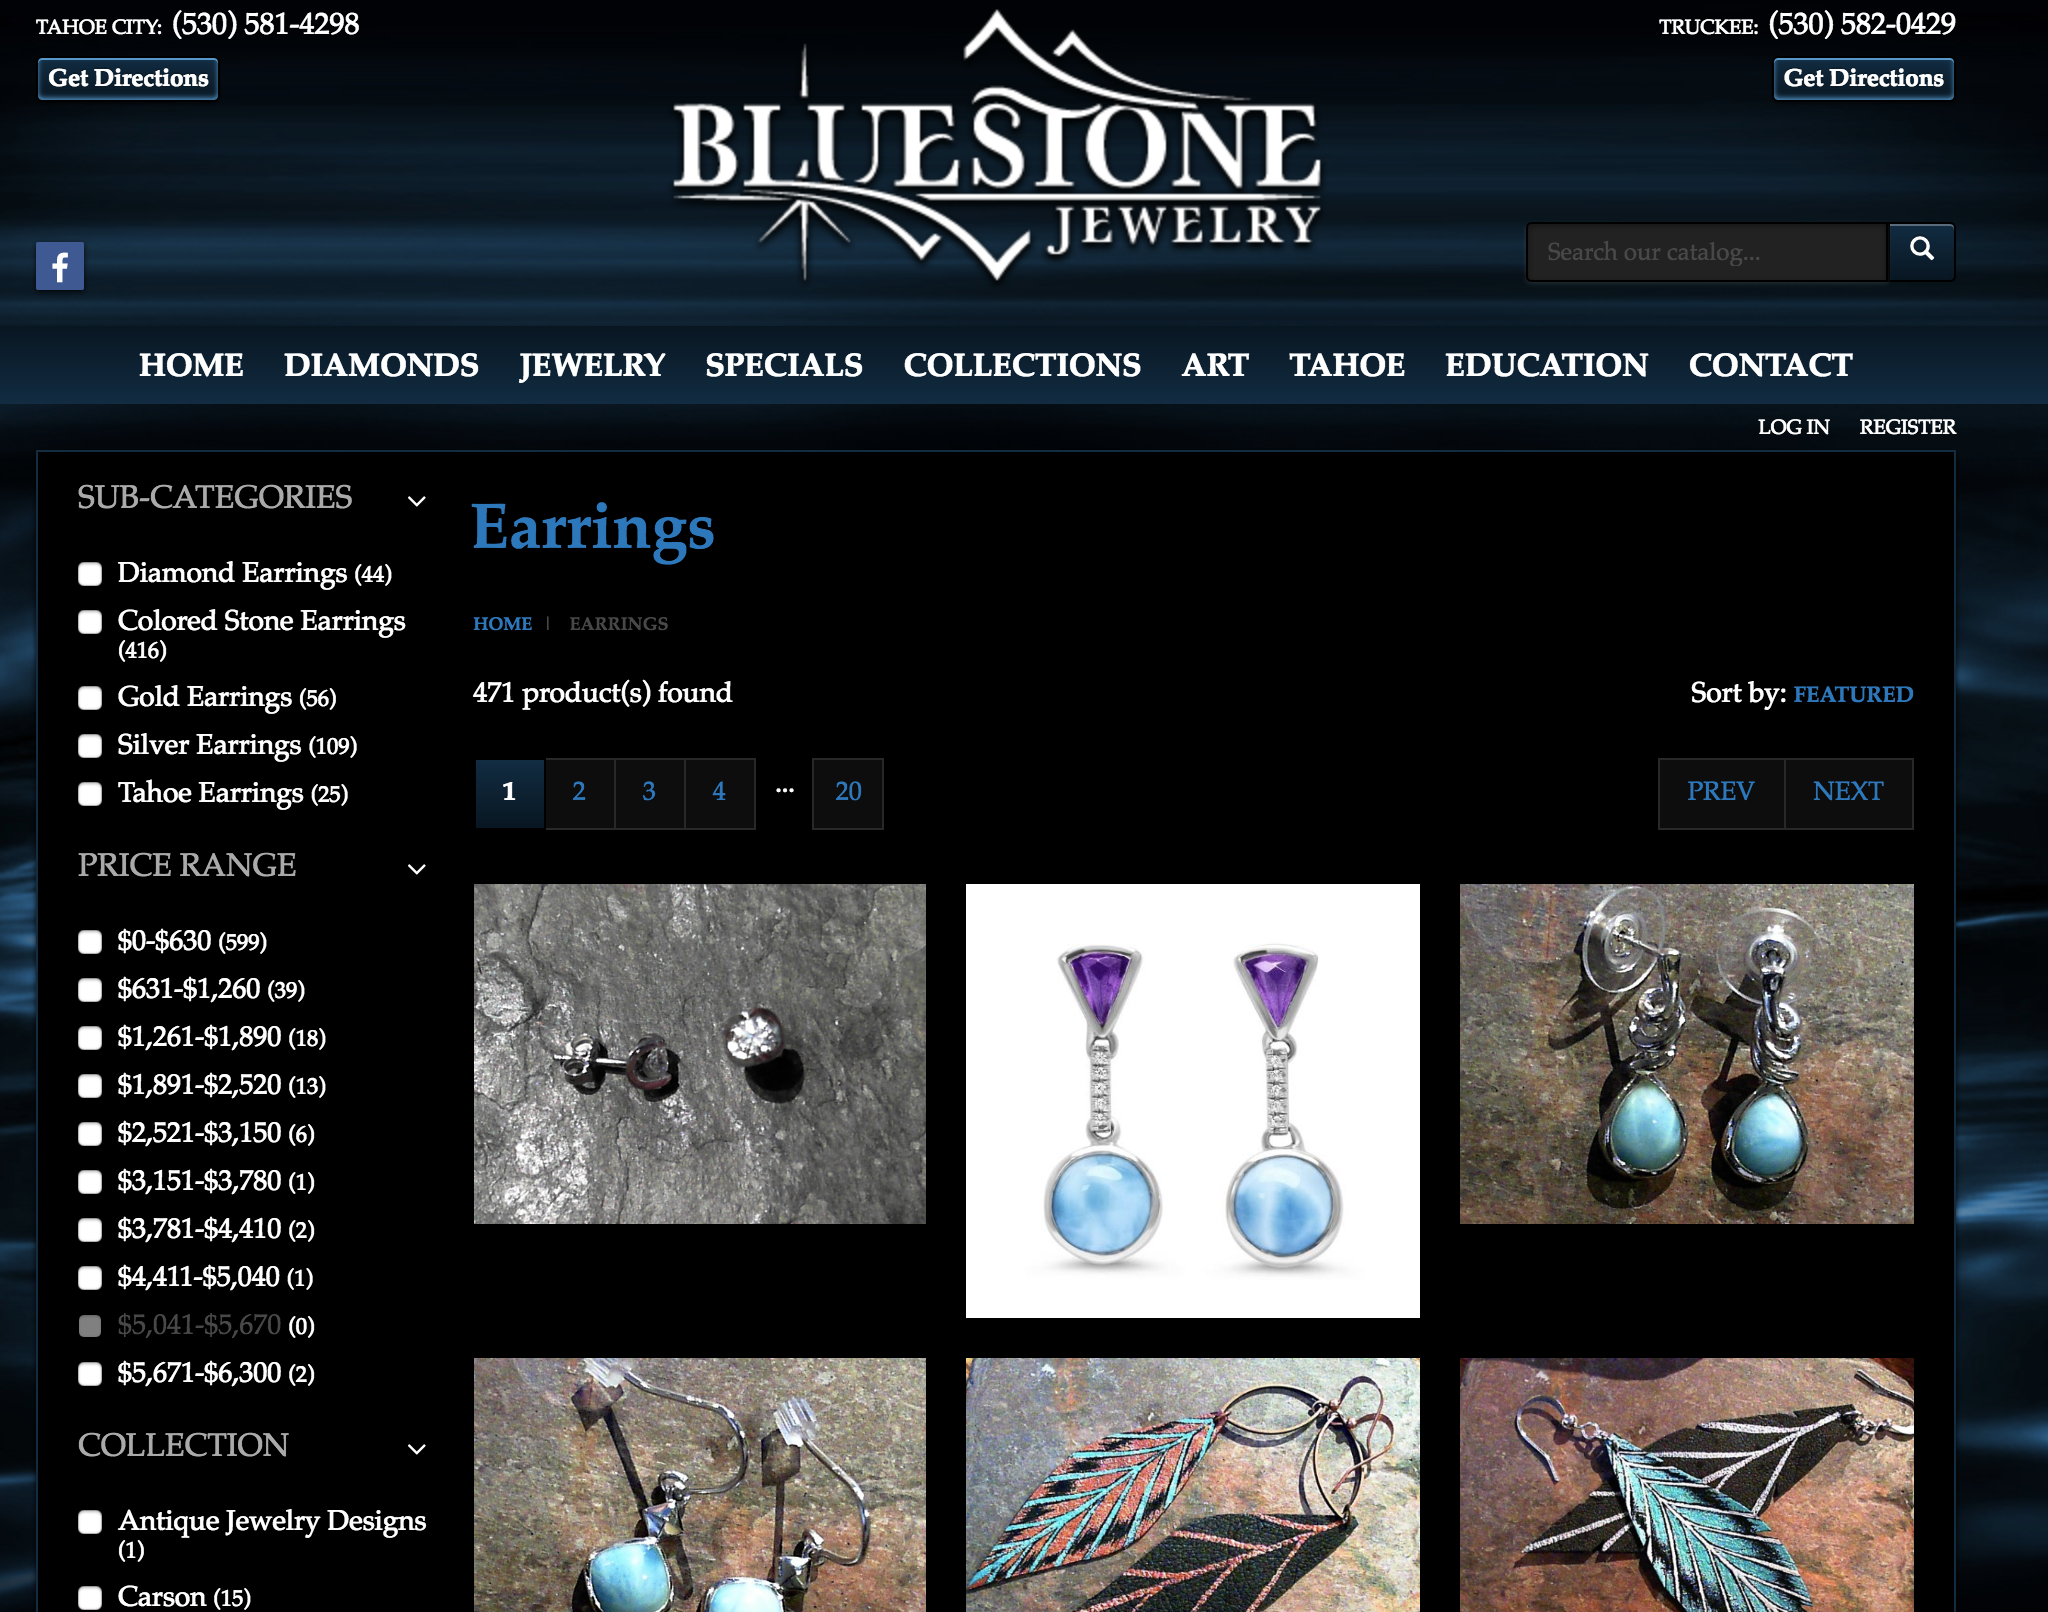 Bluestone Jewelry at both locations 495 N. Lake Blvd, Tahoe City &amp; 10046 Donner Pass Rd, Truckee, CA